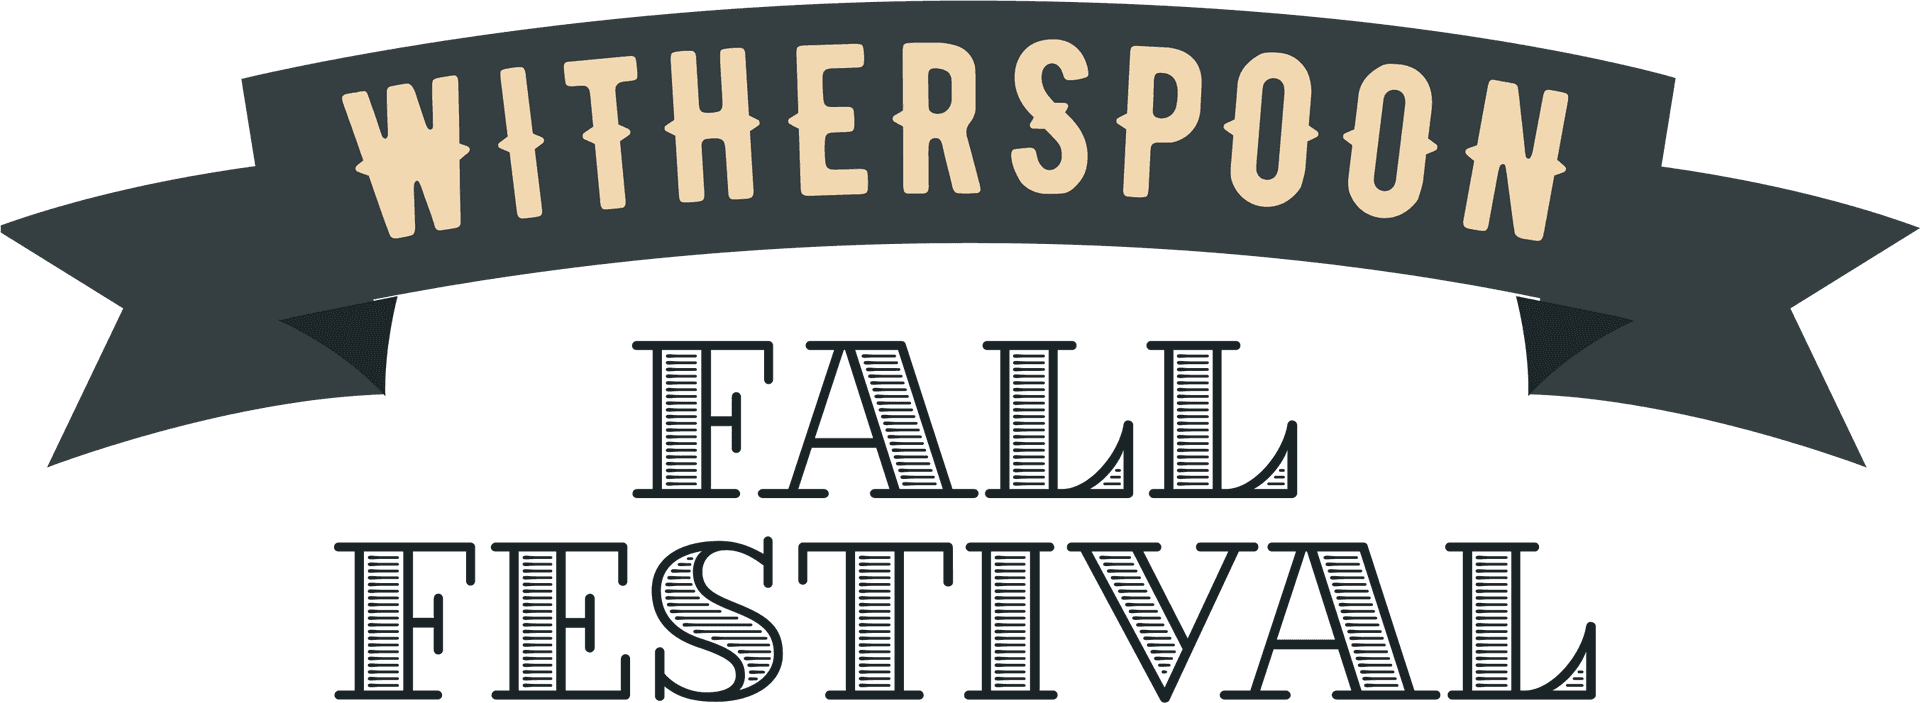 Witherspoon Fall Festival Banner PNG